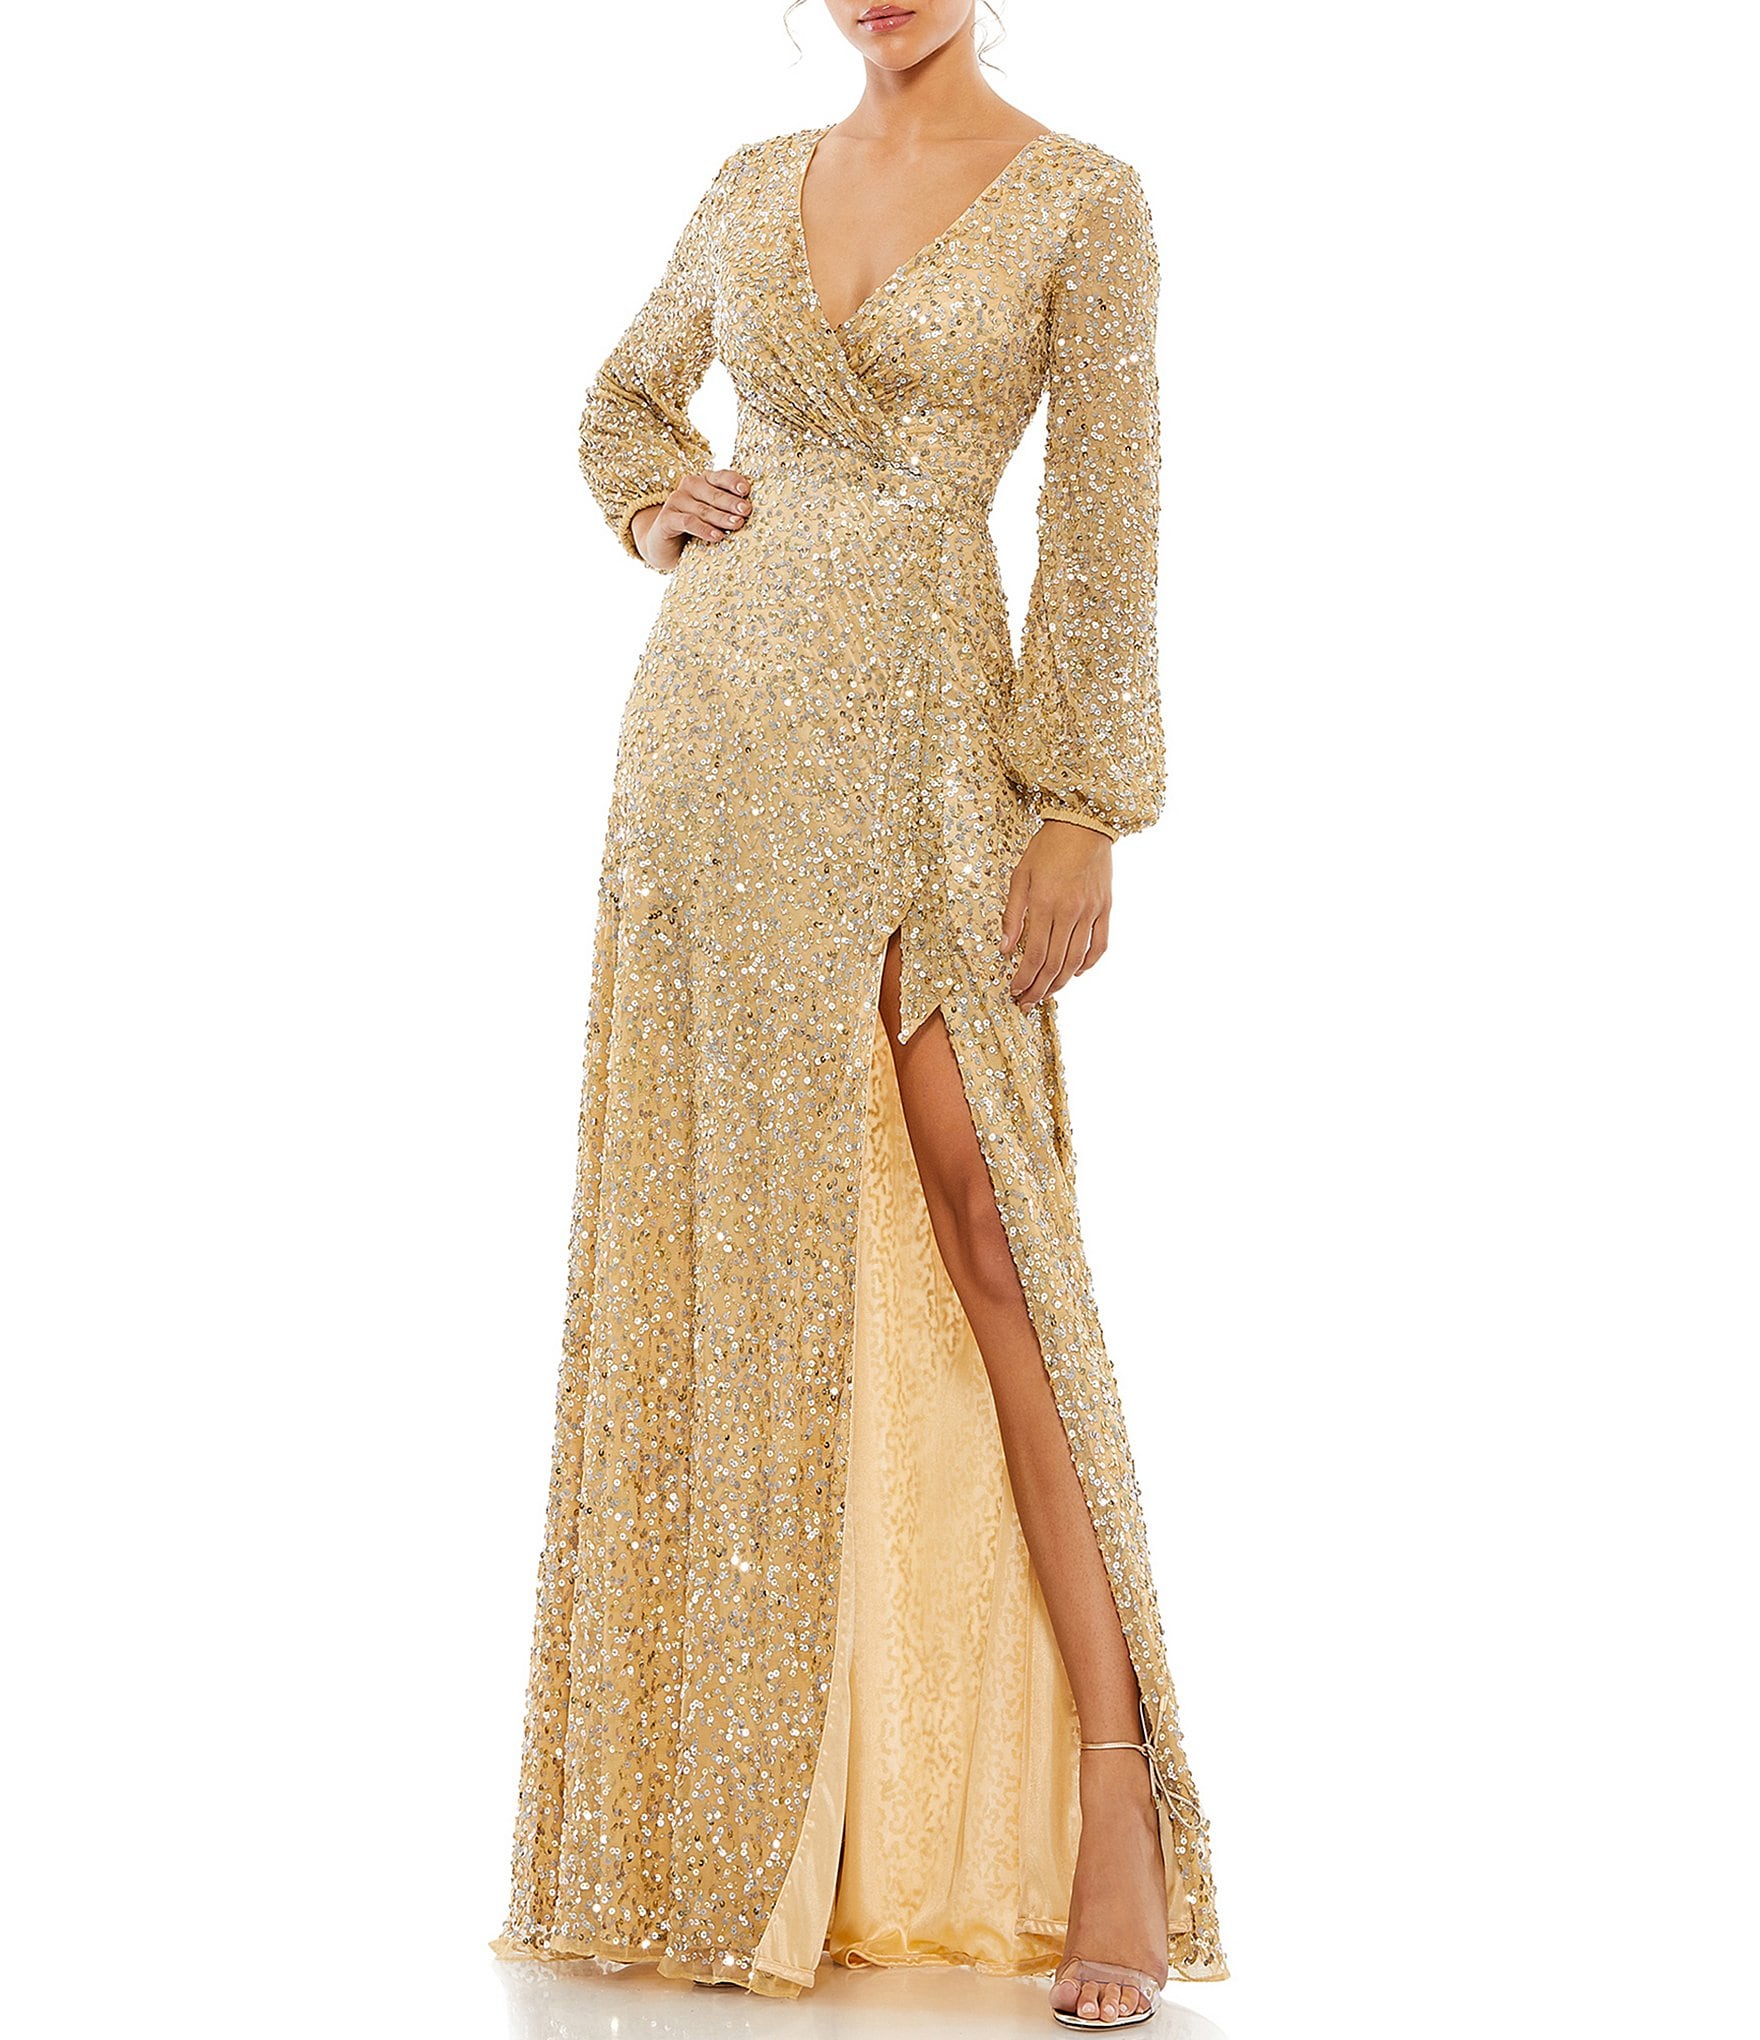 gold sequin ball gown